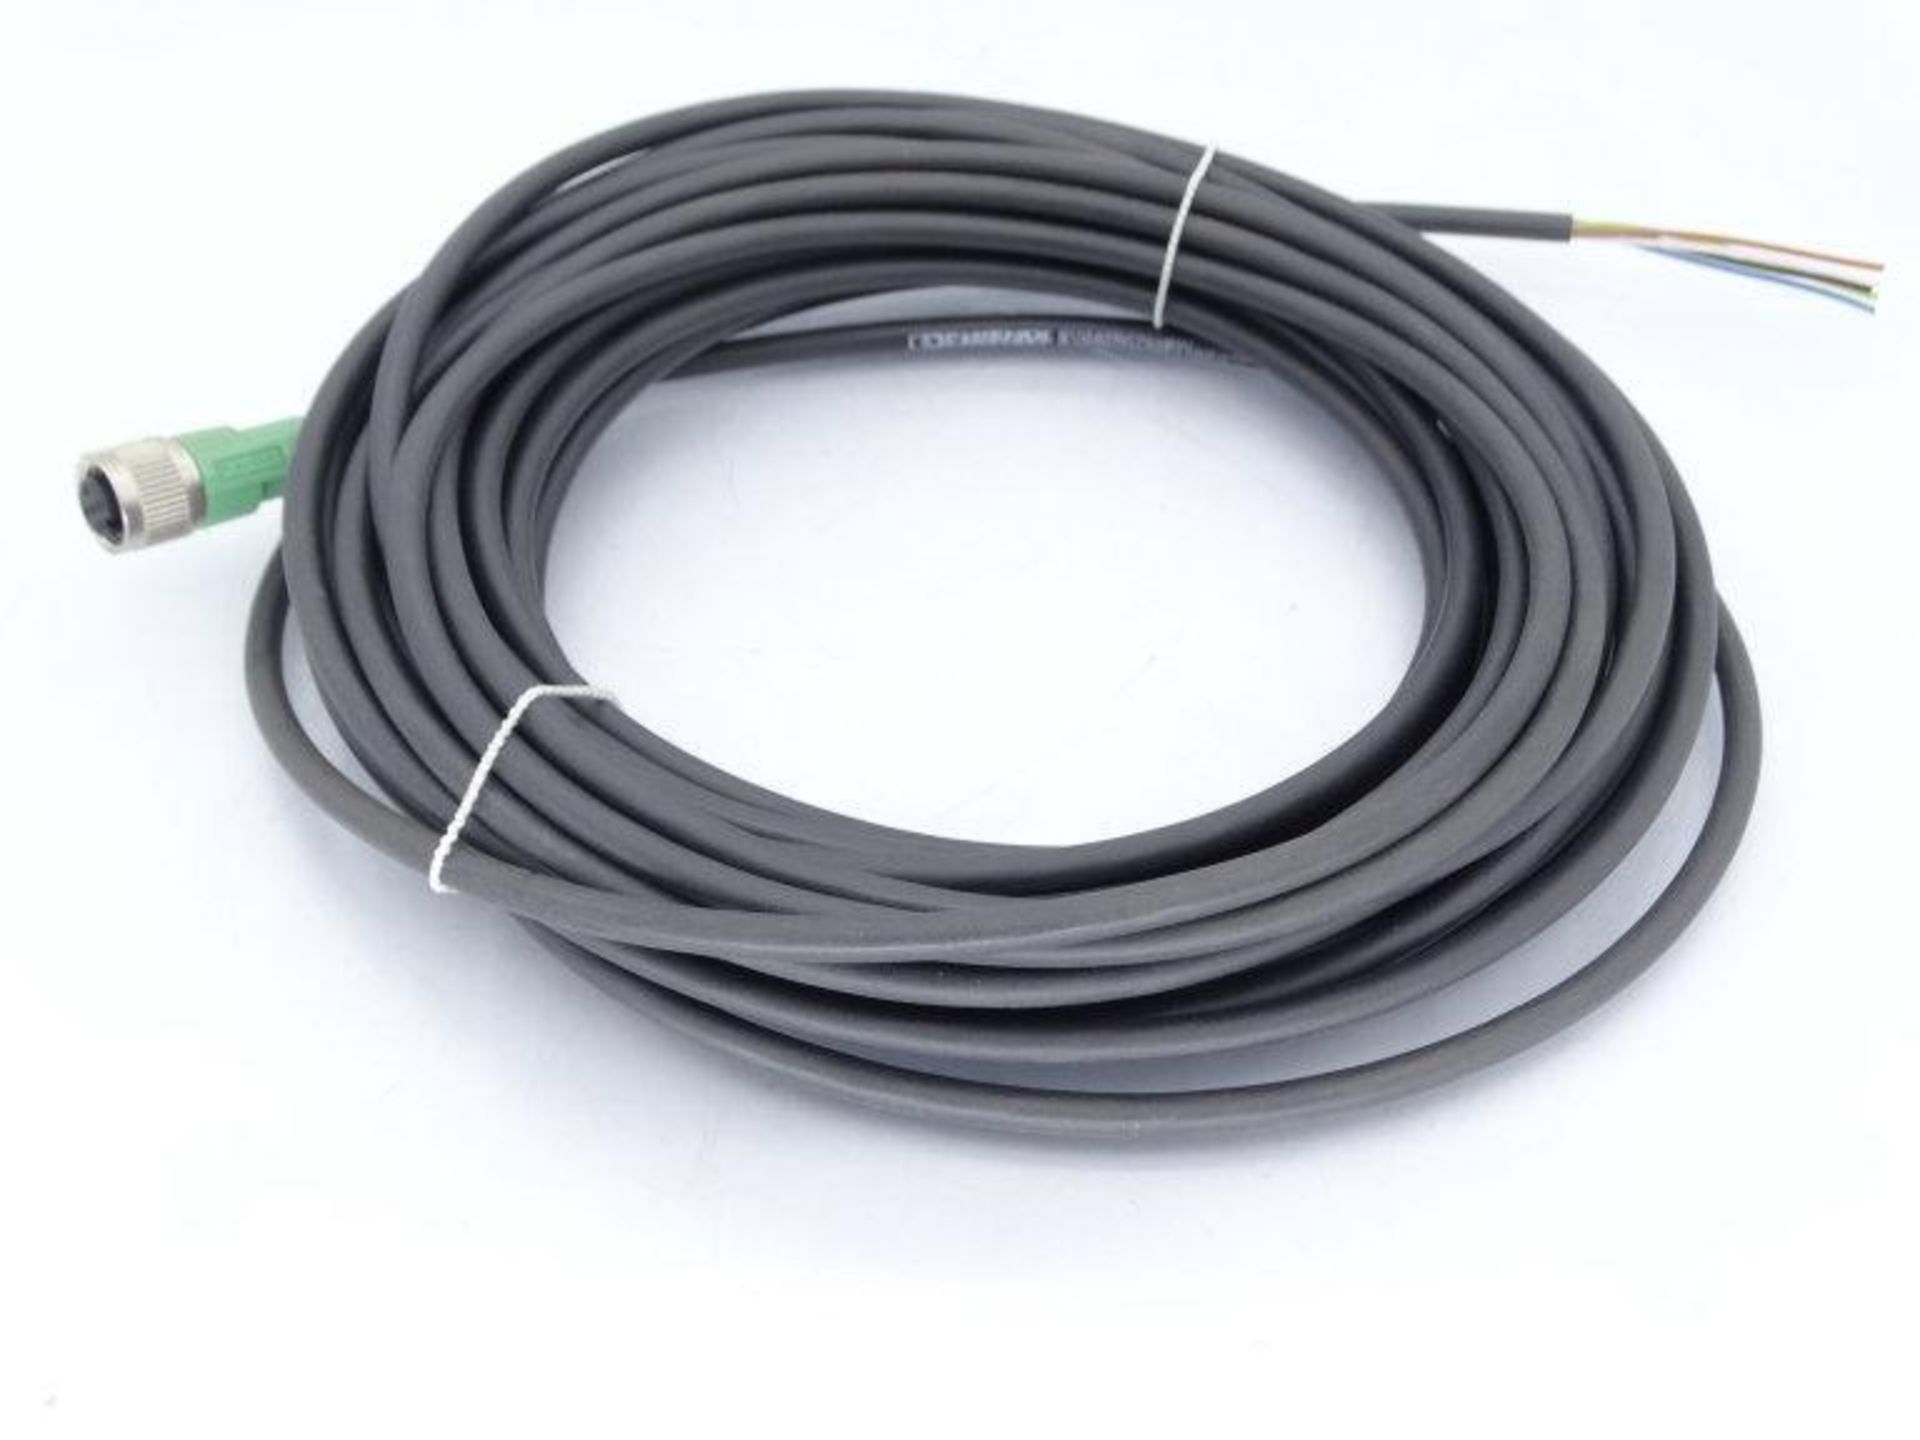 (5) PHOENIX CONTACT SAC-5P-10 0-PUR/FS SCO Cable - Image 2 of 3